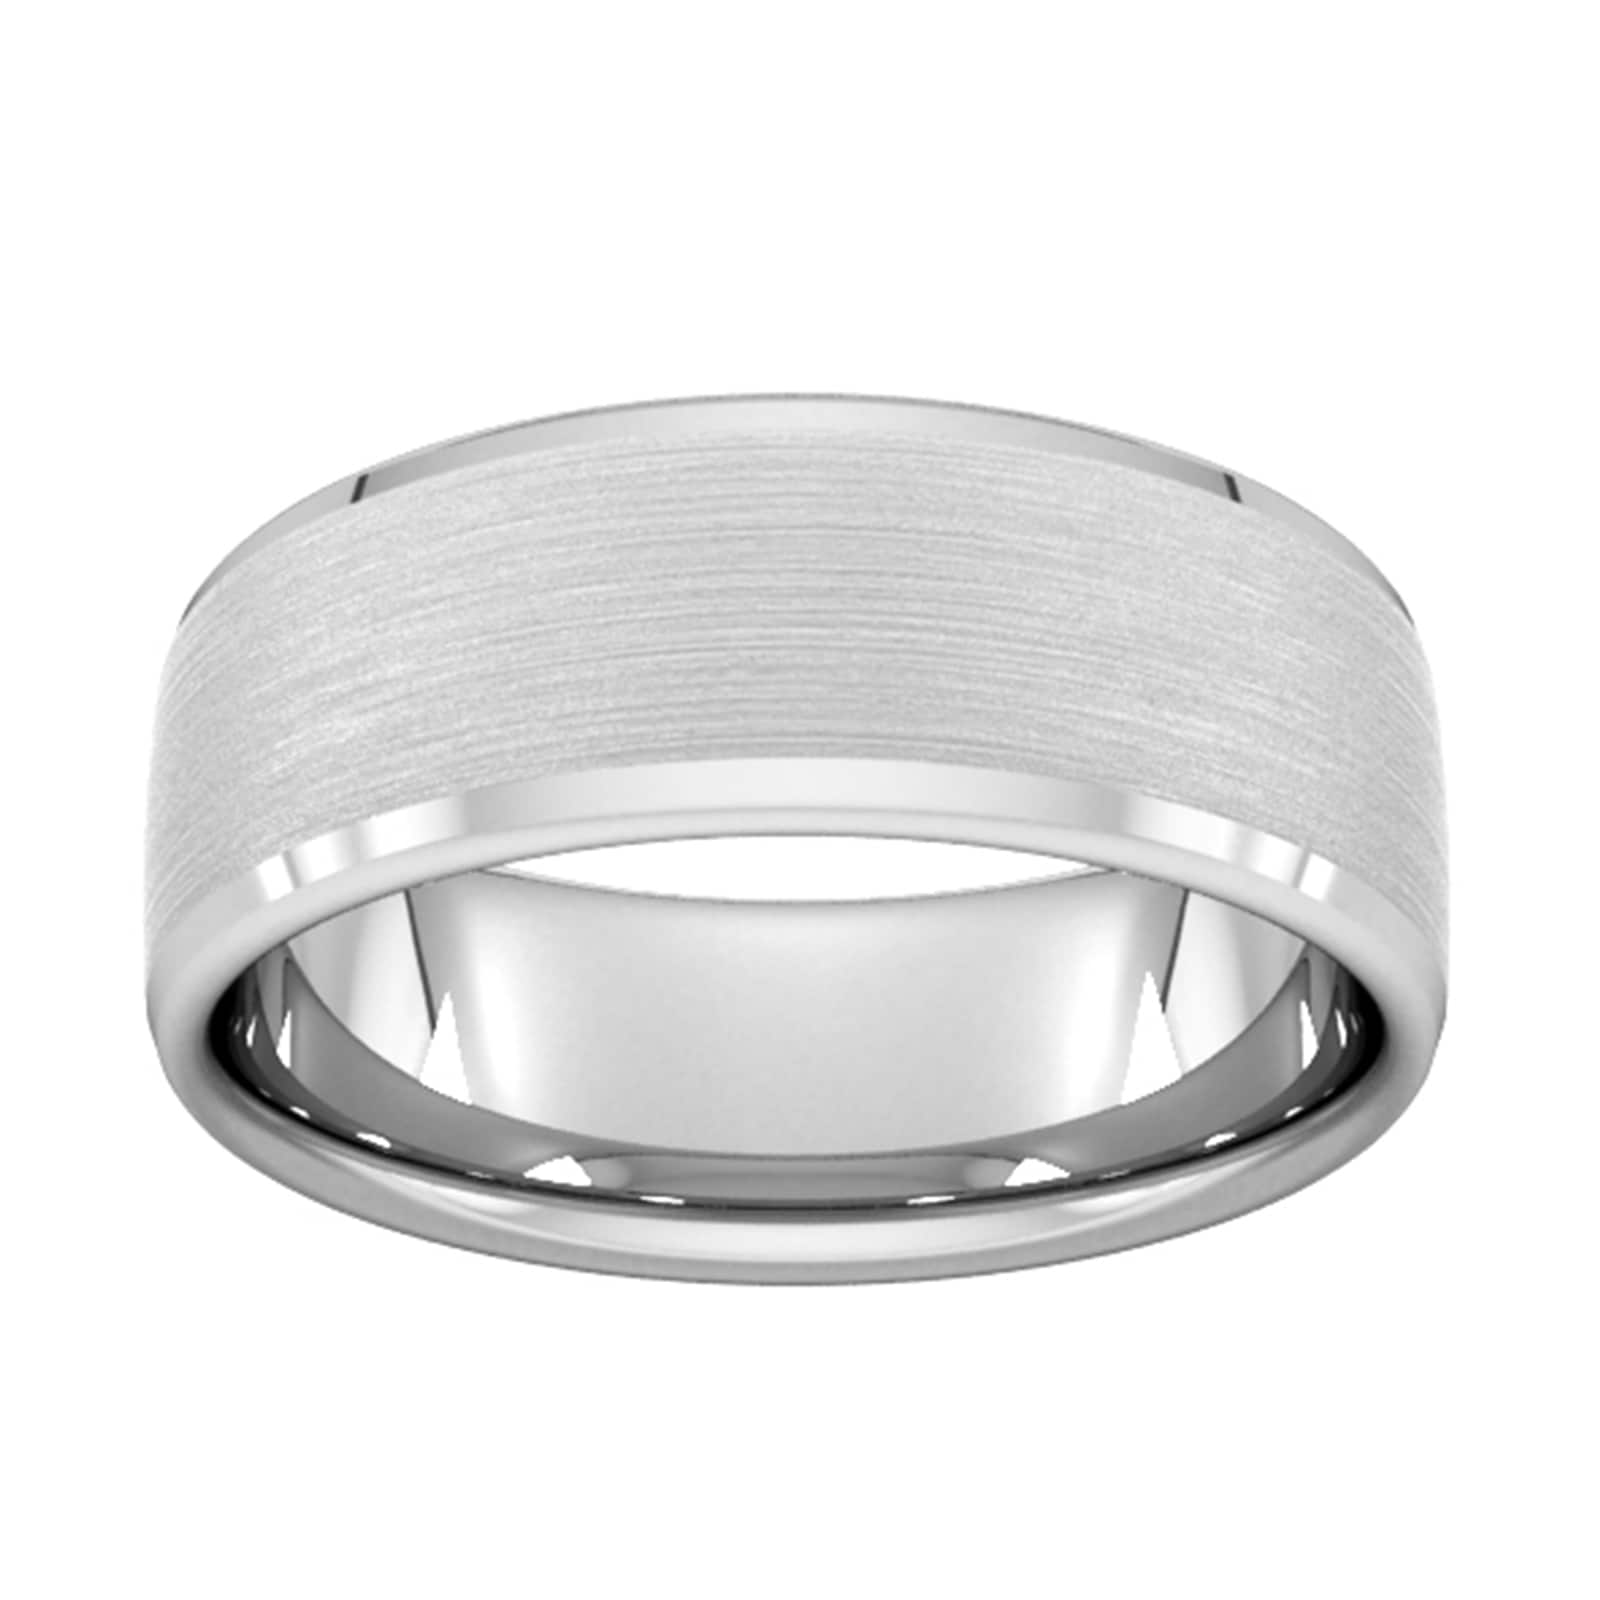 8mm D Shape Standard Polished Chamfered Edges With Matt Centre Wedding Ring In 9 Carat White Gold - Ring Size H